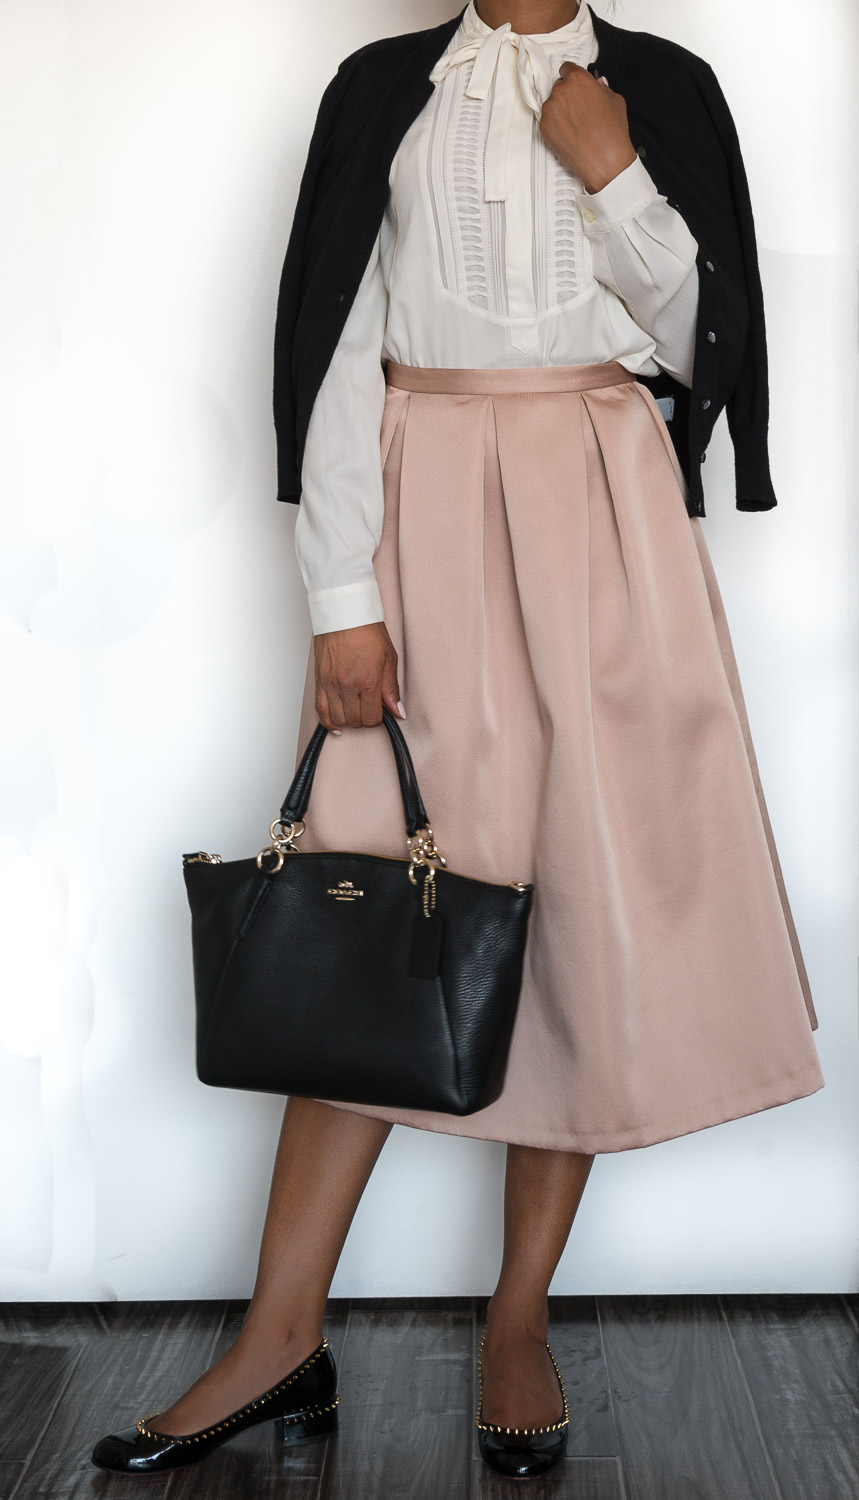 Shirt from Ann Taylor, Sweater from J Crew, Skirt from River Island, Purse from Coach and Shoes from Christian Louboutin